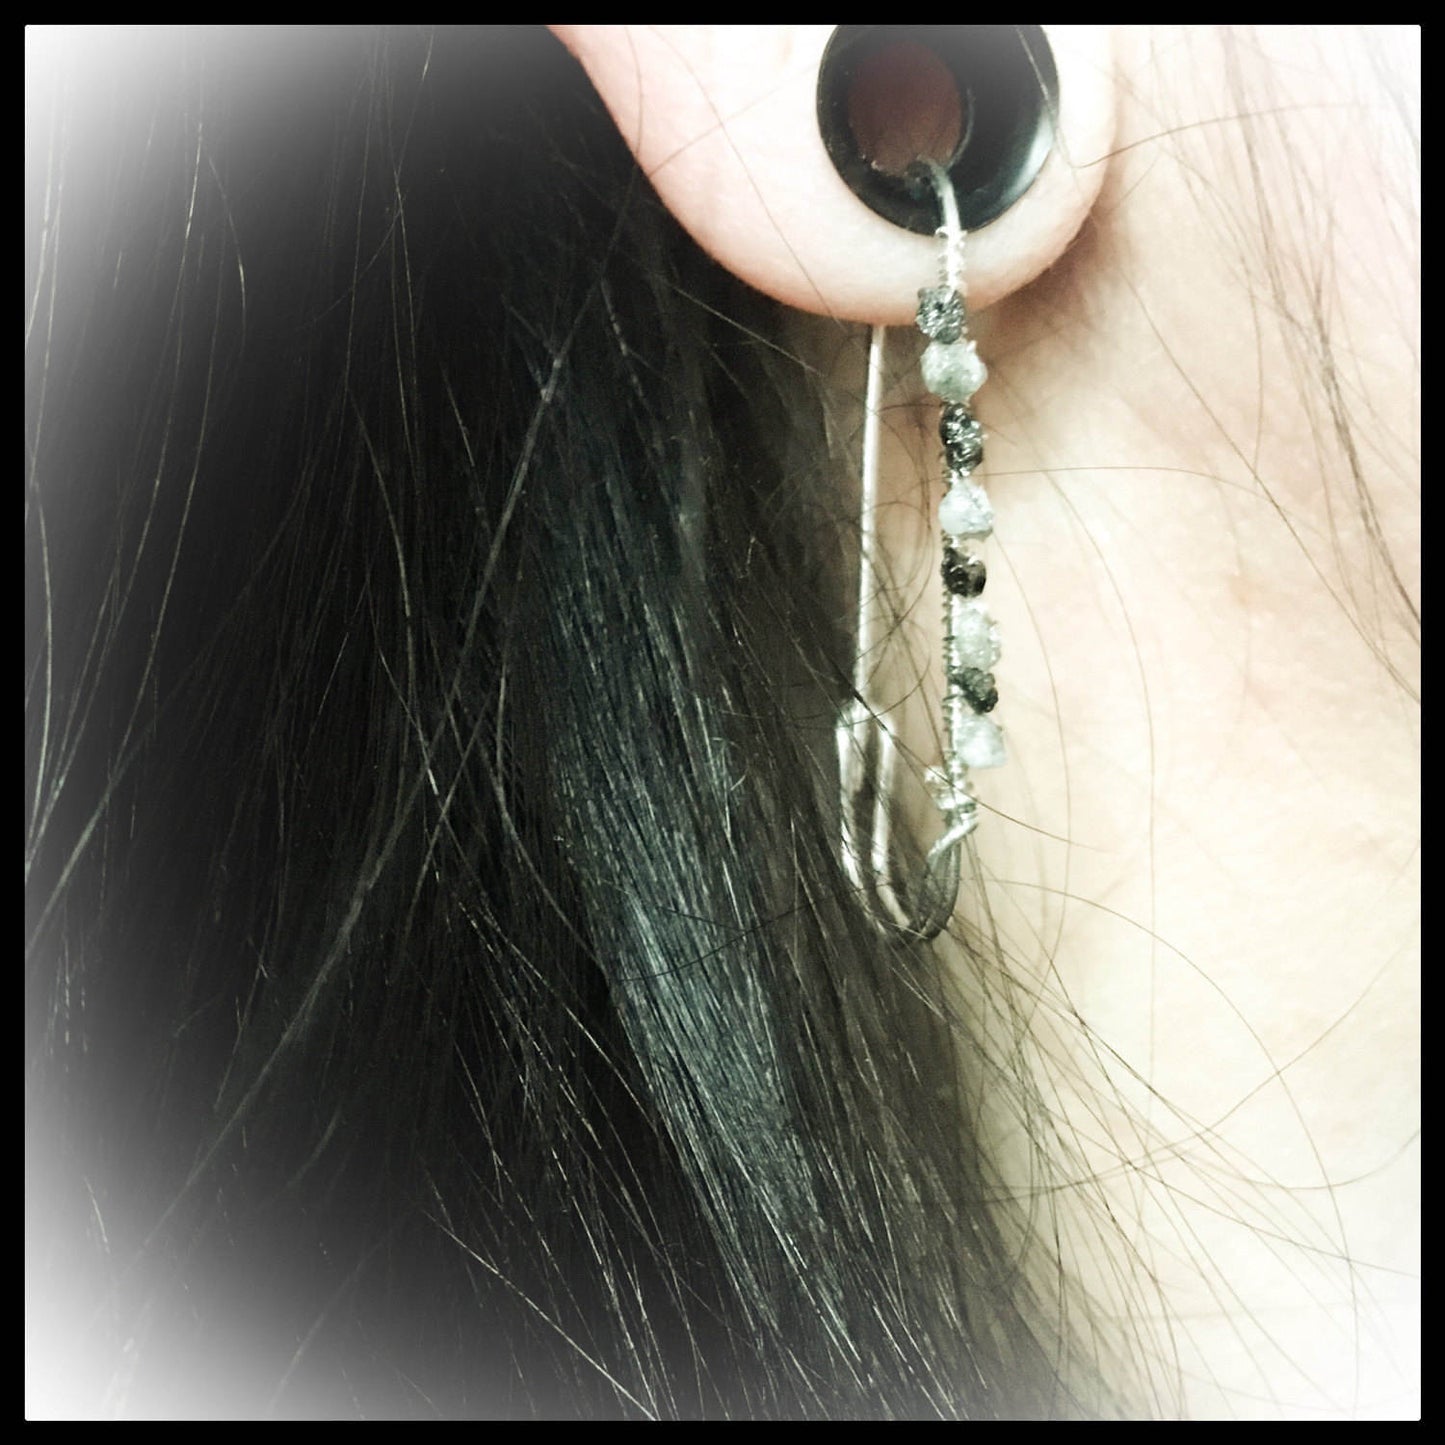 Black & Silver Raw Diamond Nugget Safety Pin (Single) Earring. All 925 Sterling Silver Hand Forged. - Darkmoon Fayre